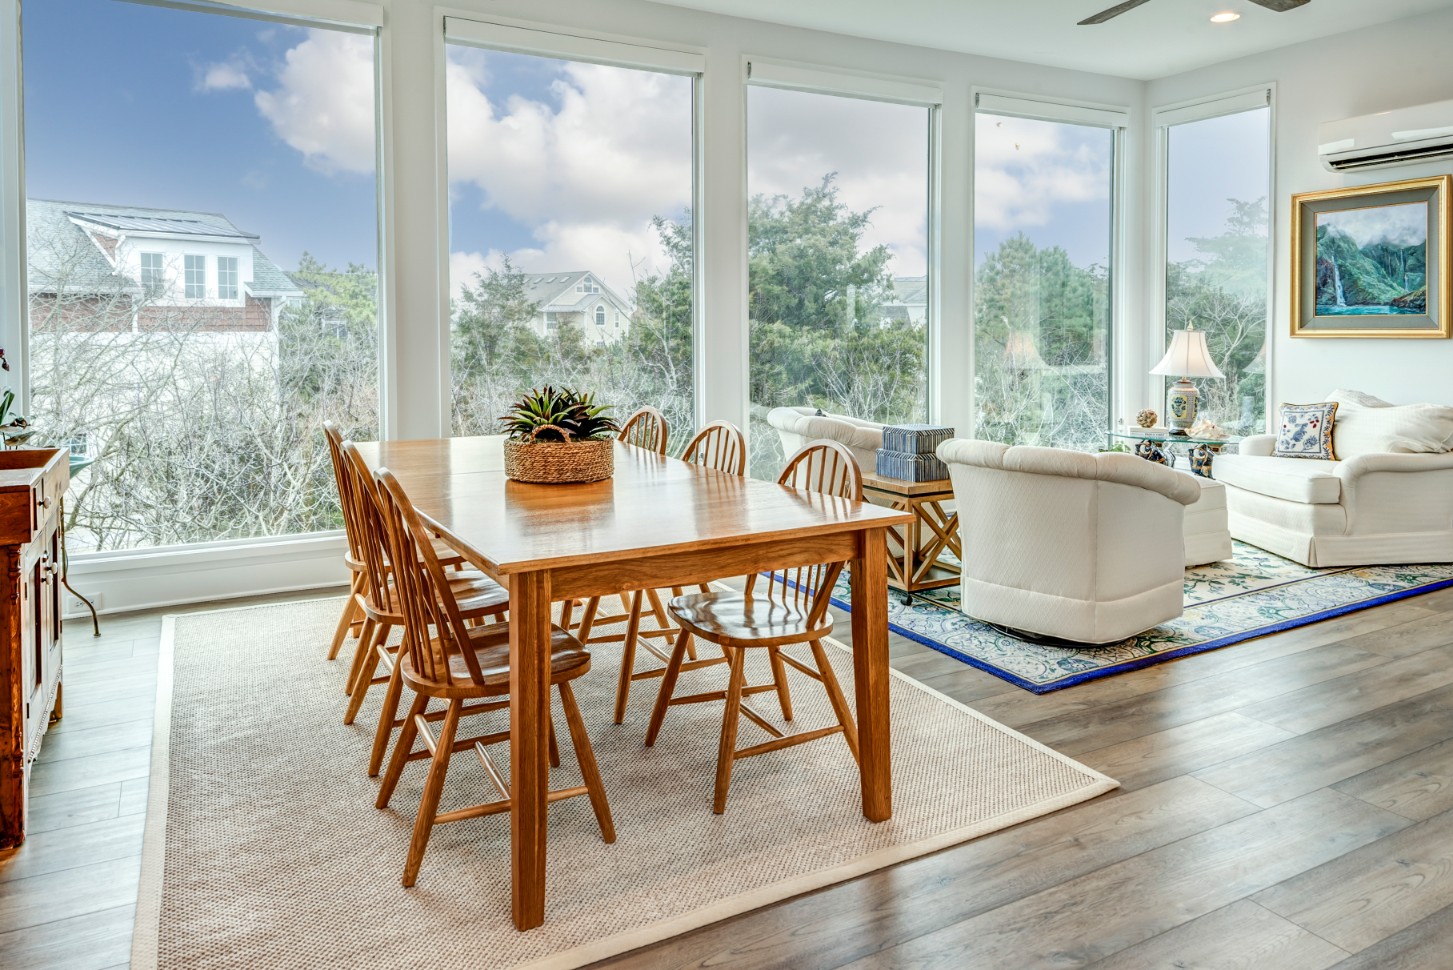 Cotton Patch Hills Renovation in Bethany Beach DE - Great Room with Wooden Dining Table and Six Chairs